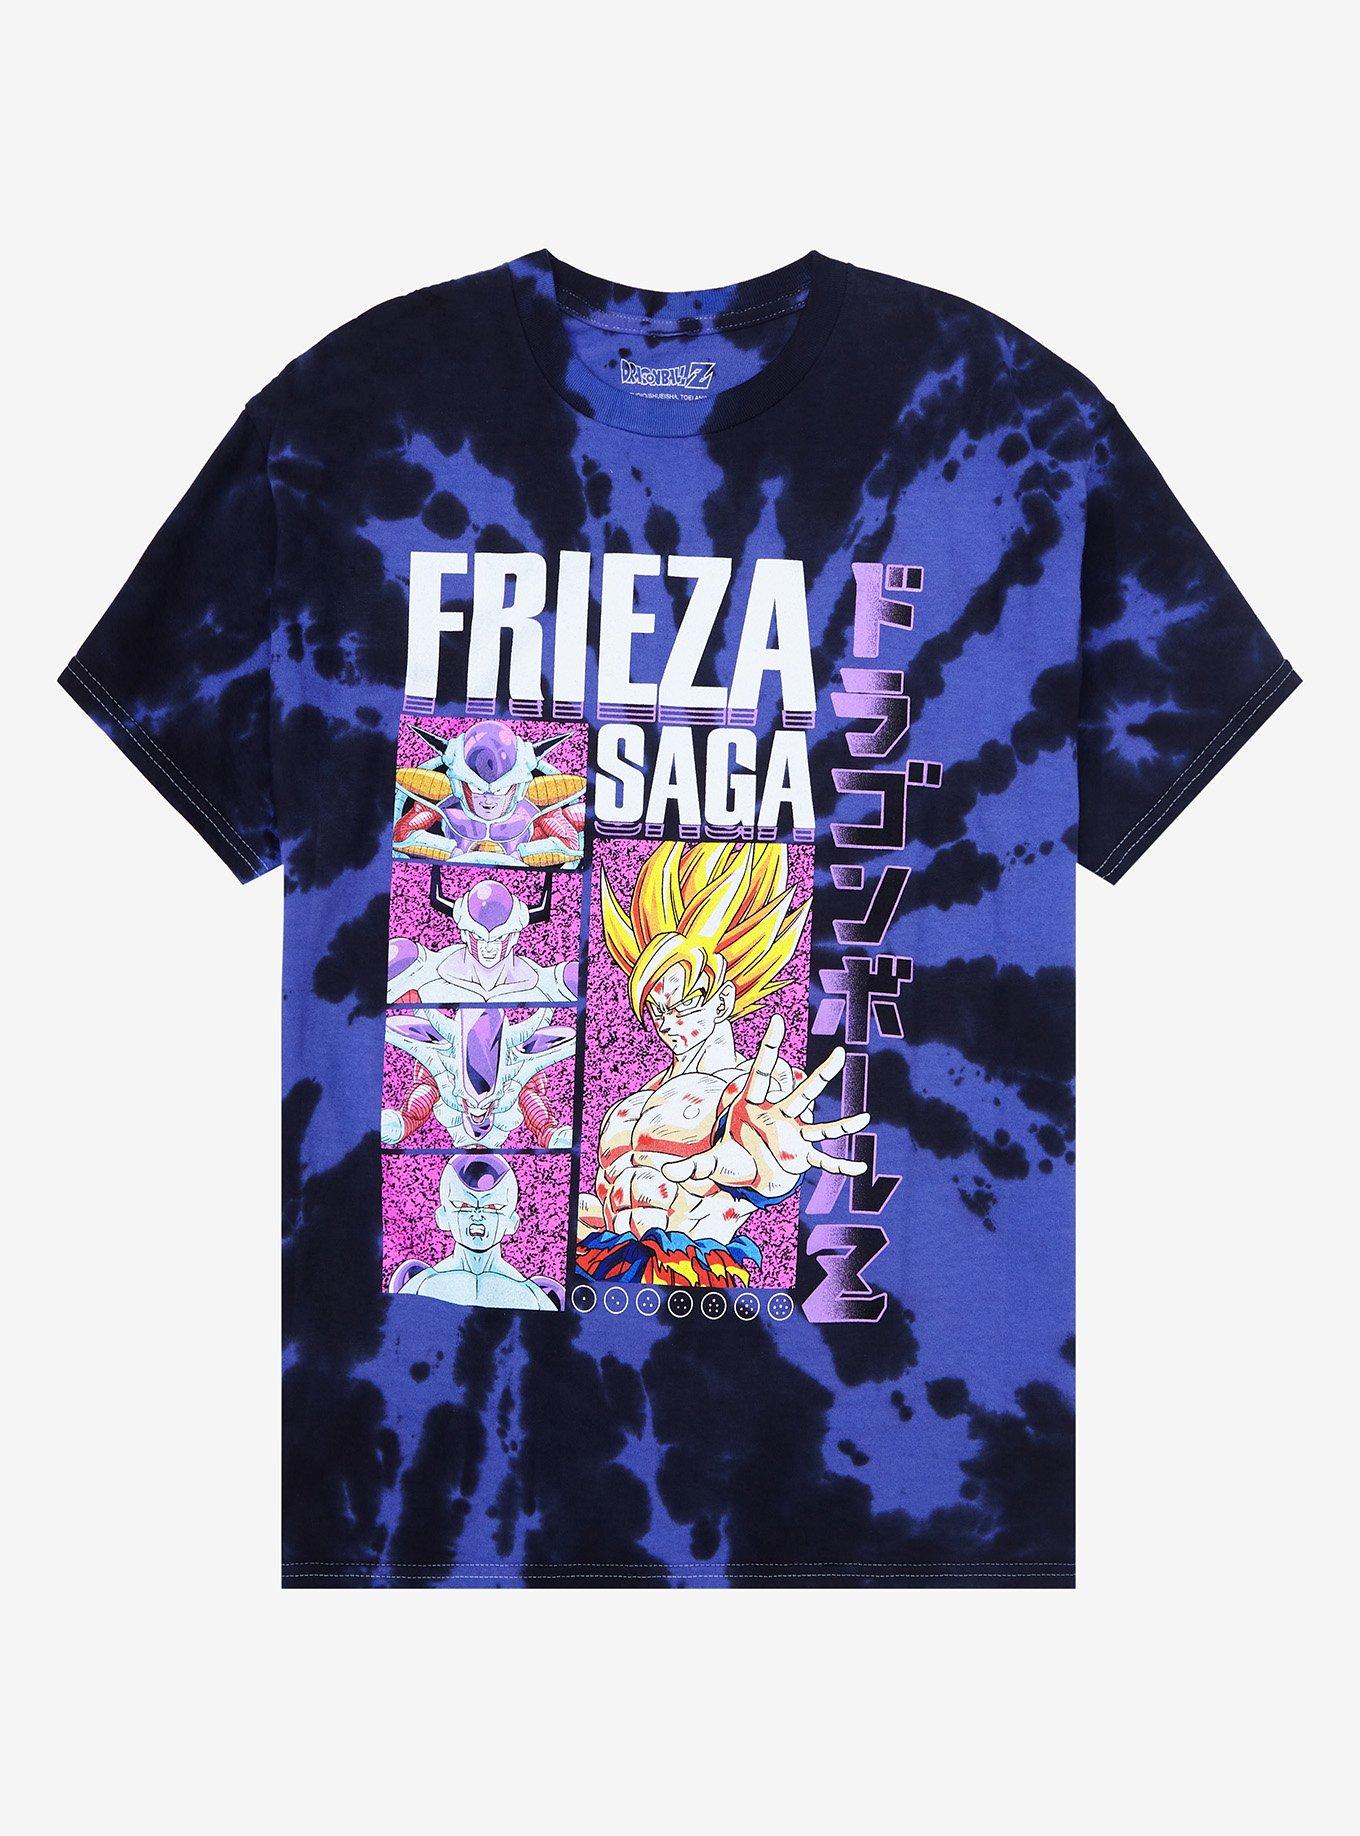 Buy Merchandise Dragon Ball Z Frieza Final Form Funko Pop and T-Shirt  (Extra Large)